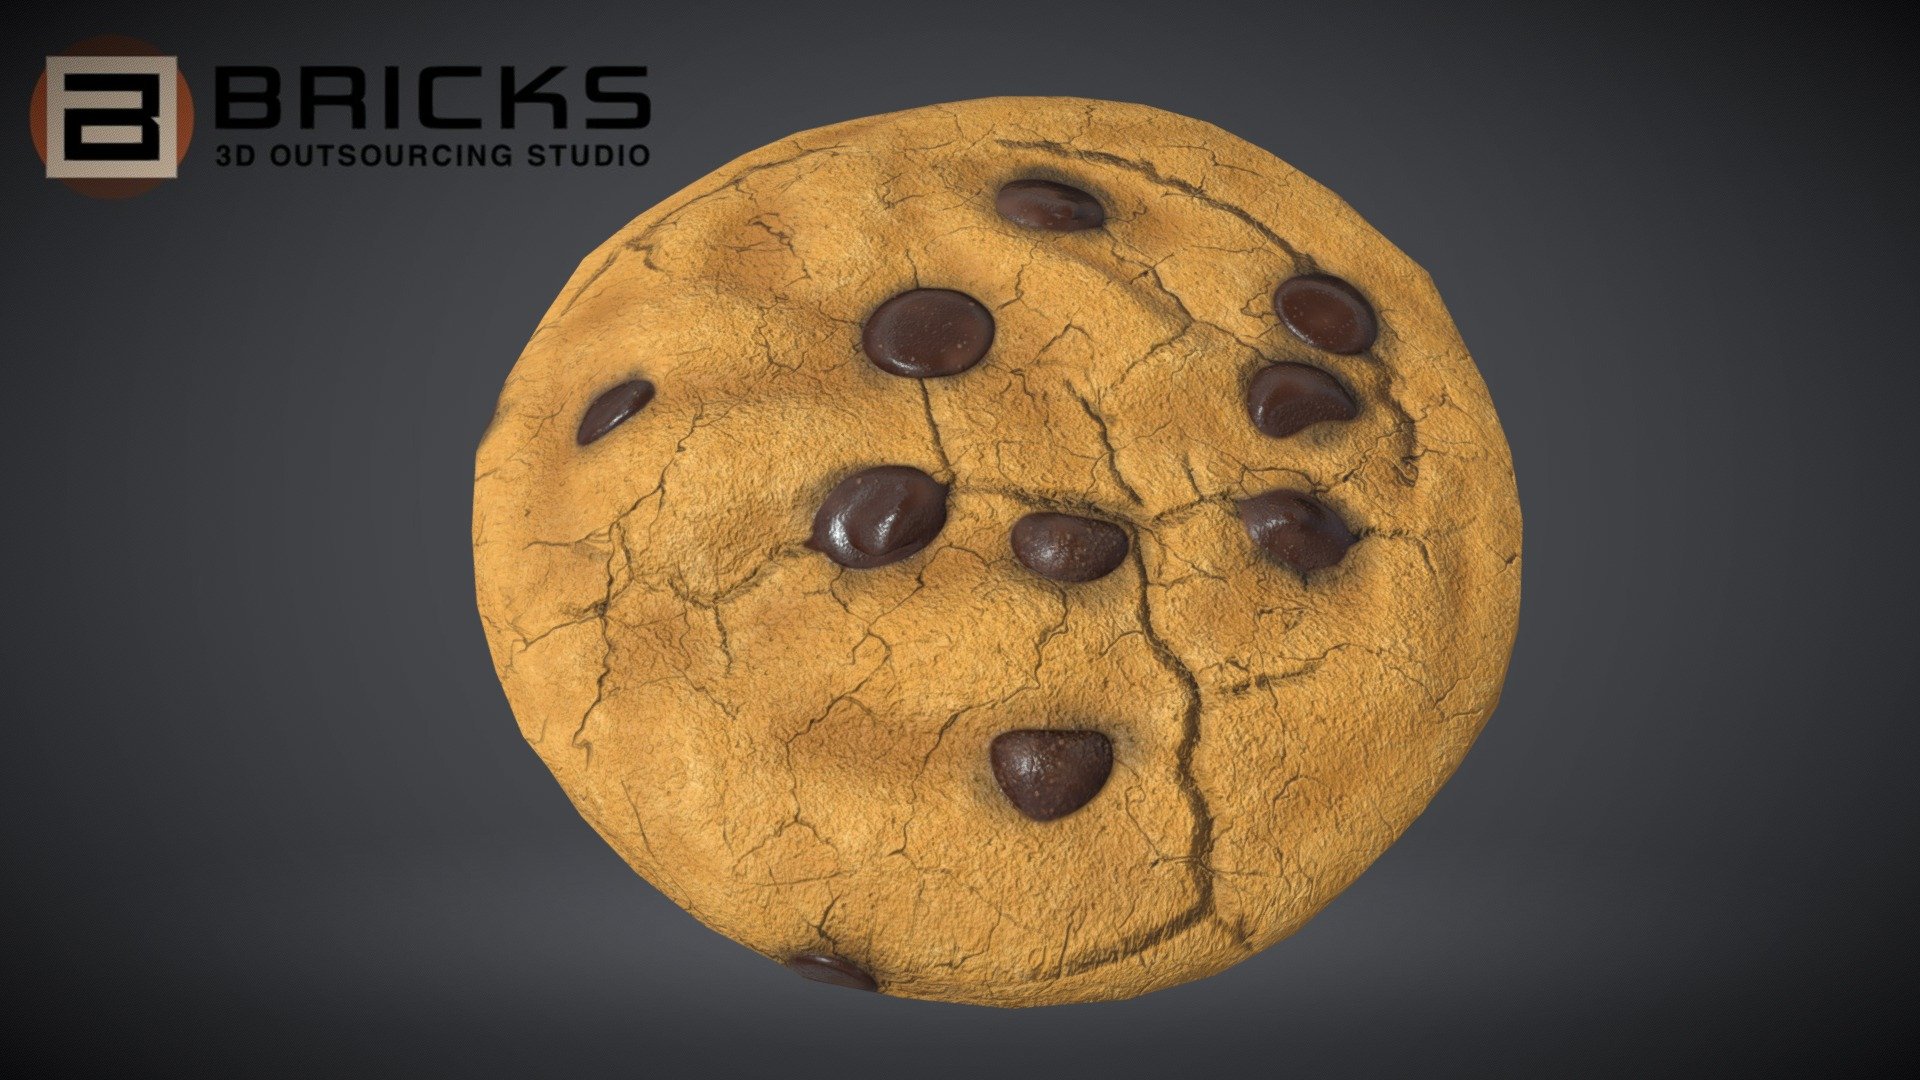 PBR Food Asset:
ChocolateChipCookie
Polycount: 1200
Vertex count: 663
Texture Size: 2048px x 2048px
Normal: OpenGL

If you need any adjust in file please contact us: team@bricks3dstudio.com

Hire us: tringuyen@bricks3dstudio.com
Here is us: https://www.bricks3dstudio.com/
        https://www.artstation.com/bricksstudio
        https://www.facebook.com/Bricks3dstudio/
        https://www.linkedin.com/in/bricks-studio-b10462252/ - Chocolate Chip Cookie - Download Free 3D model by Bricks Studio (@bricks3dstudio) 3d model